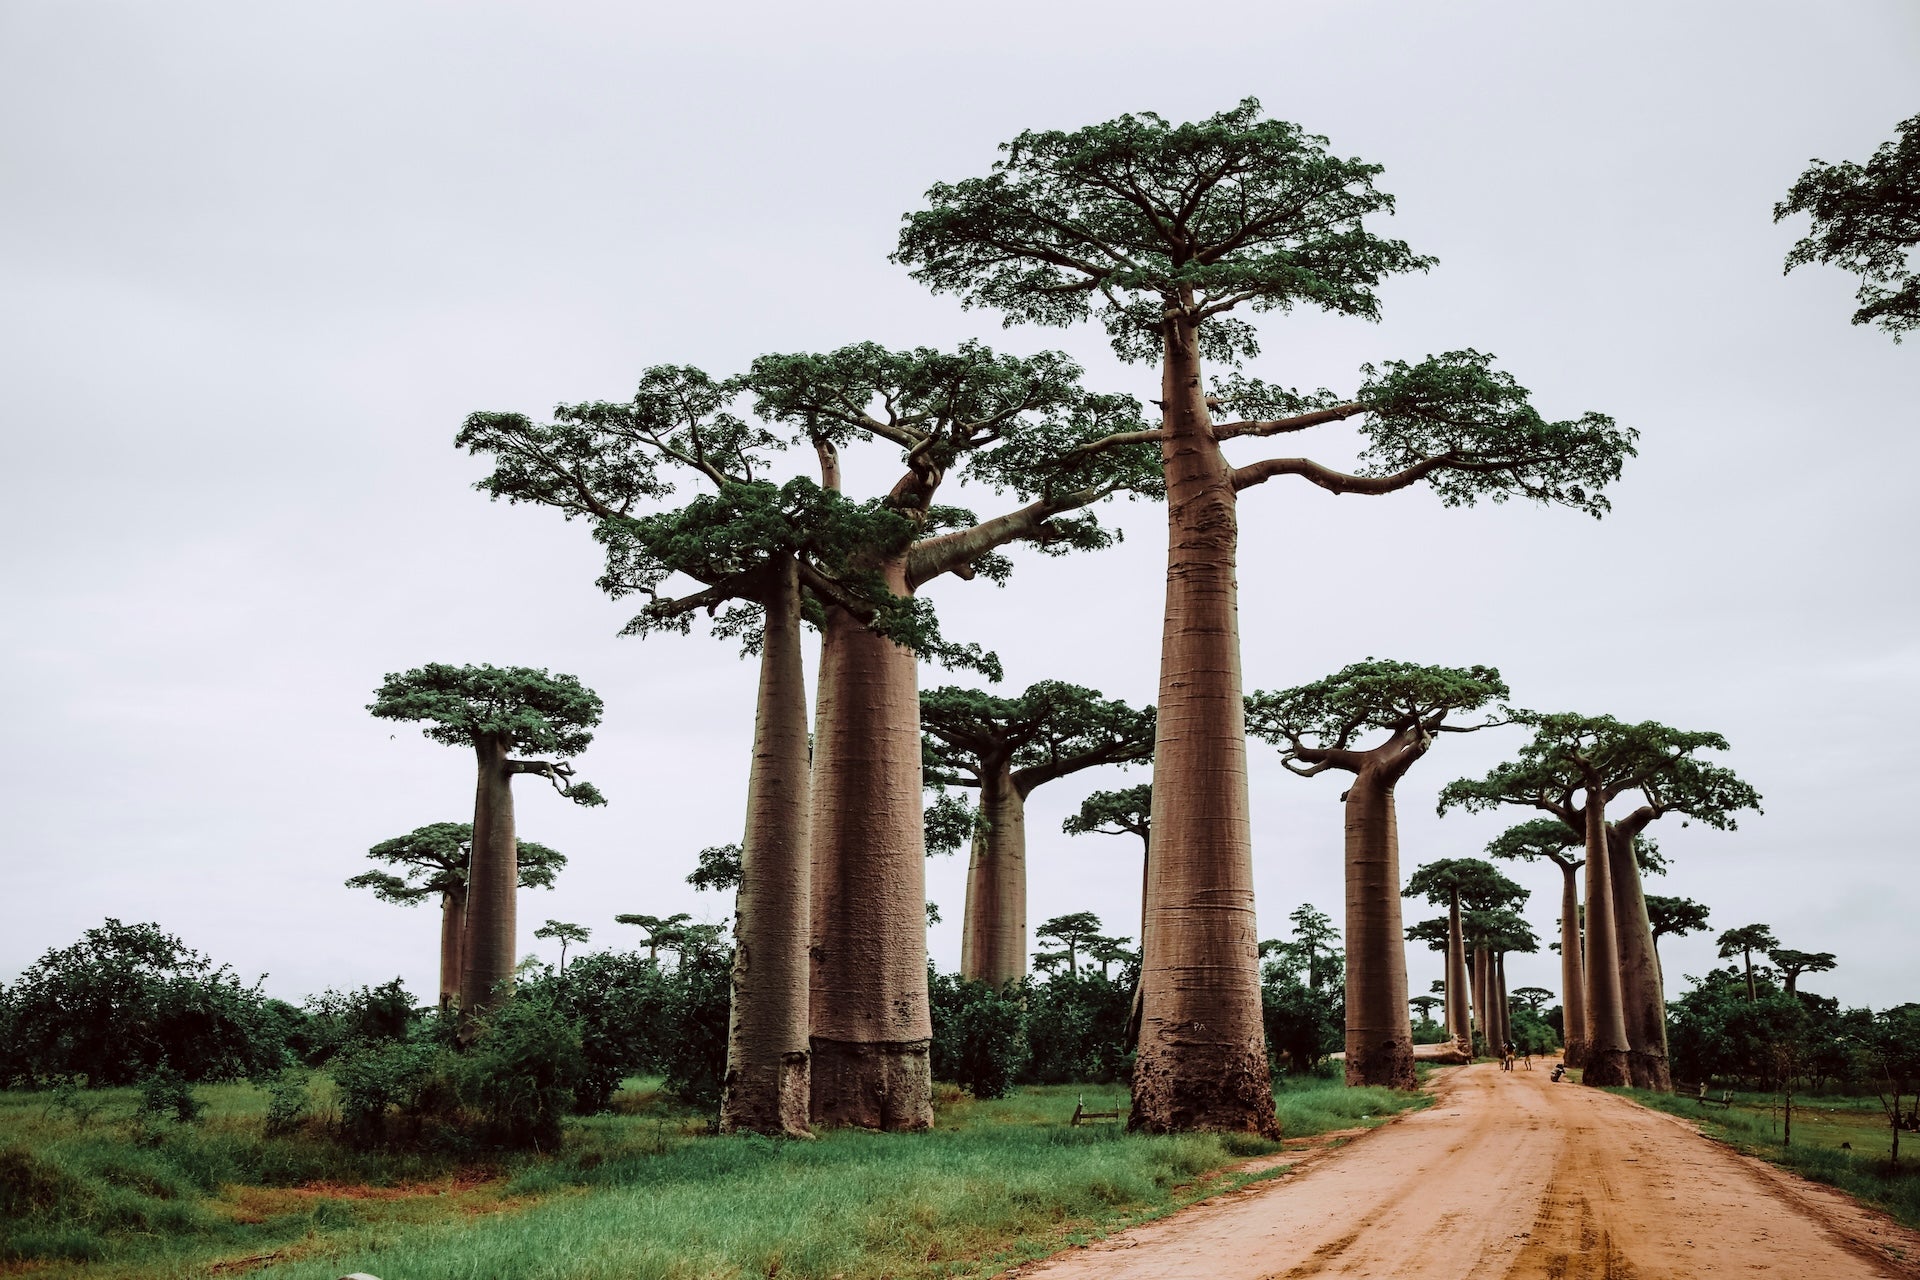 Baobab trees plotted along a road in an African village